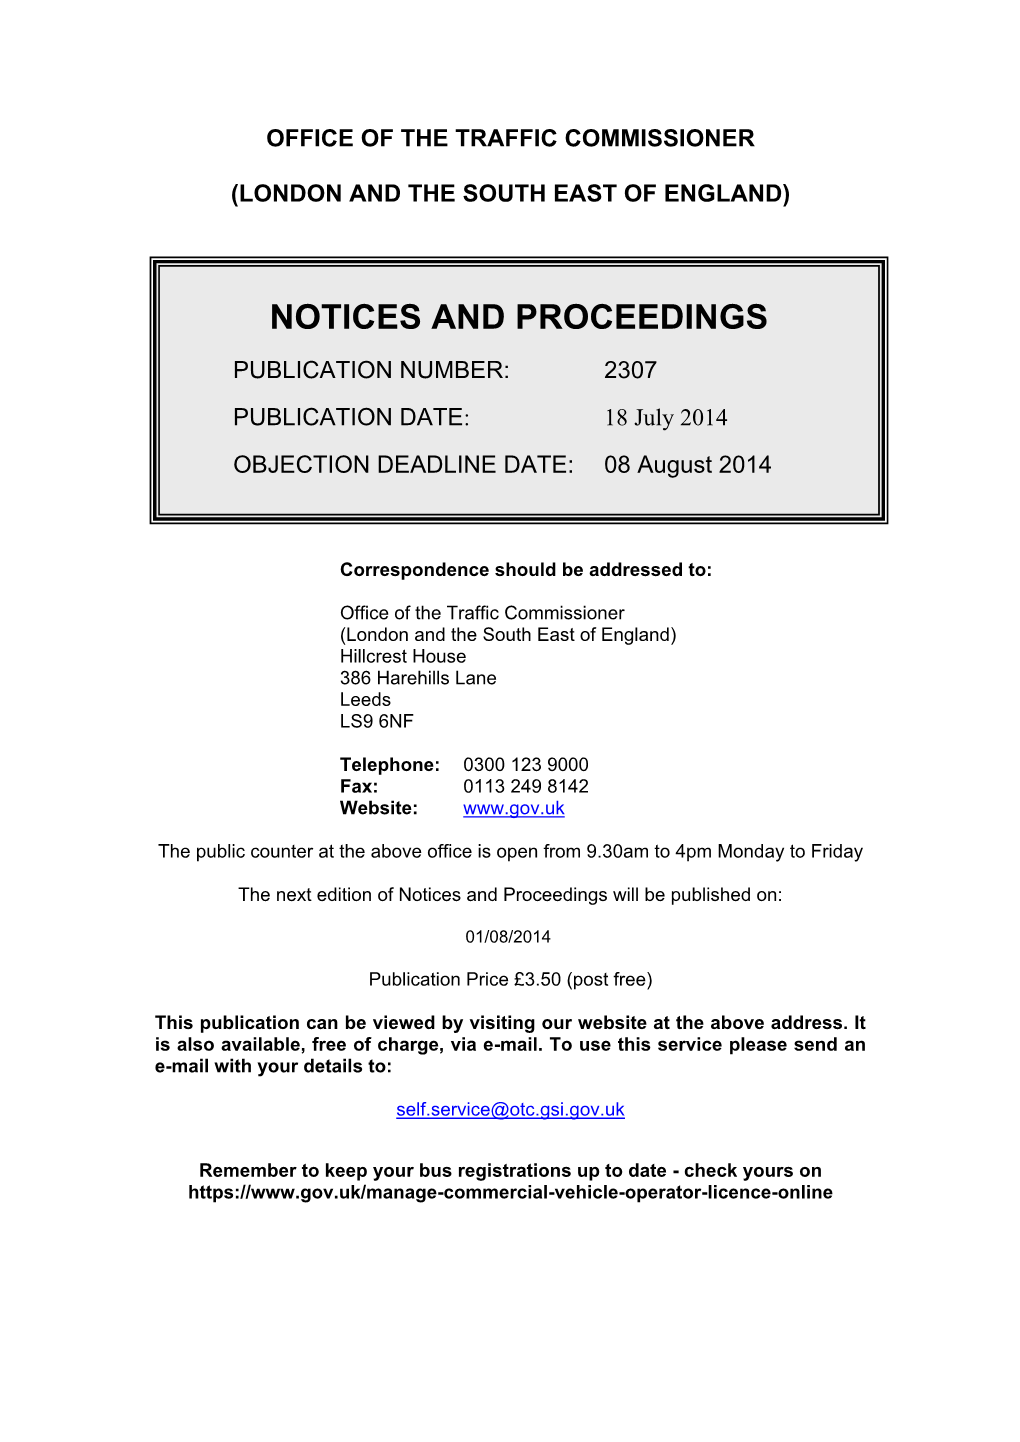 Notices and Proceedings 18 July 2014